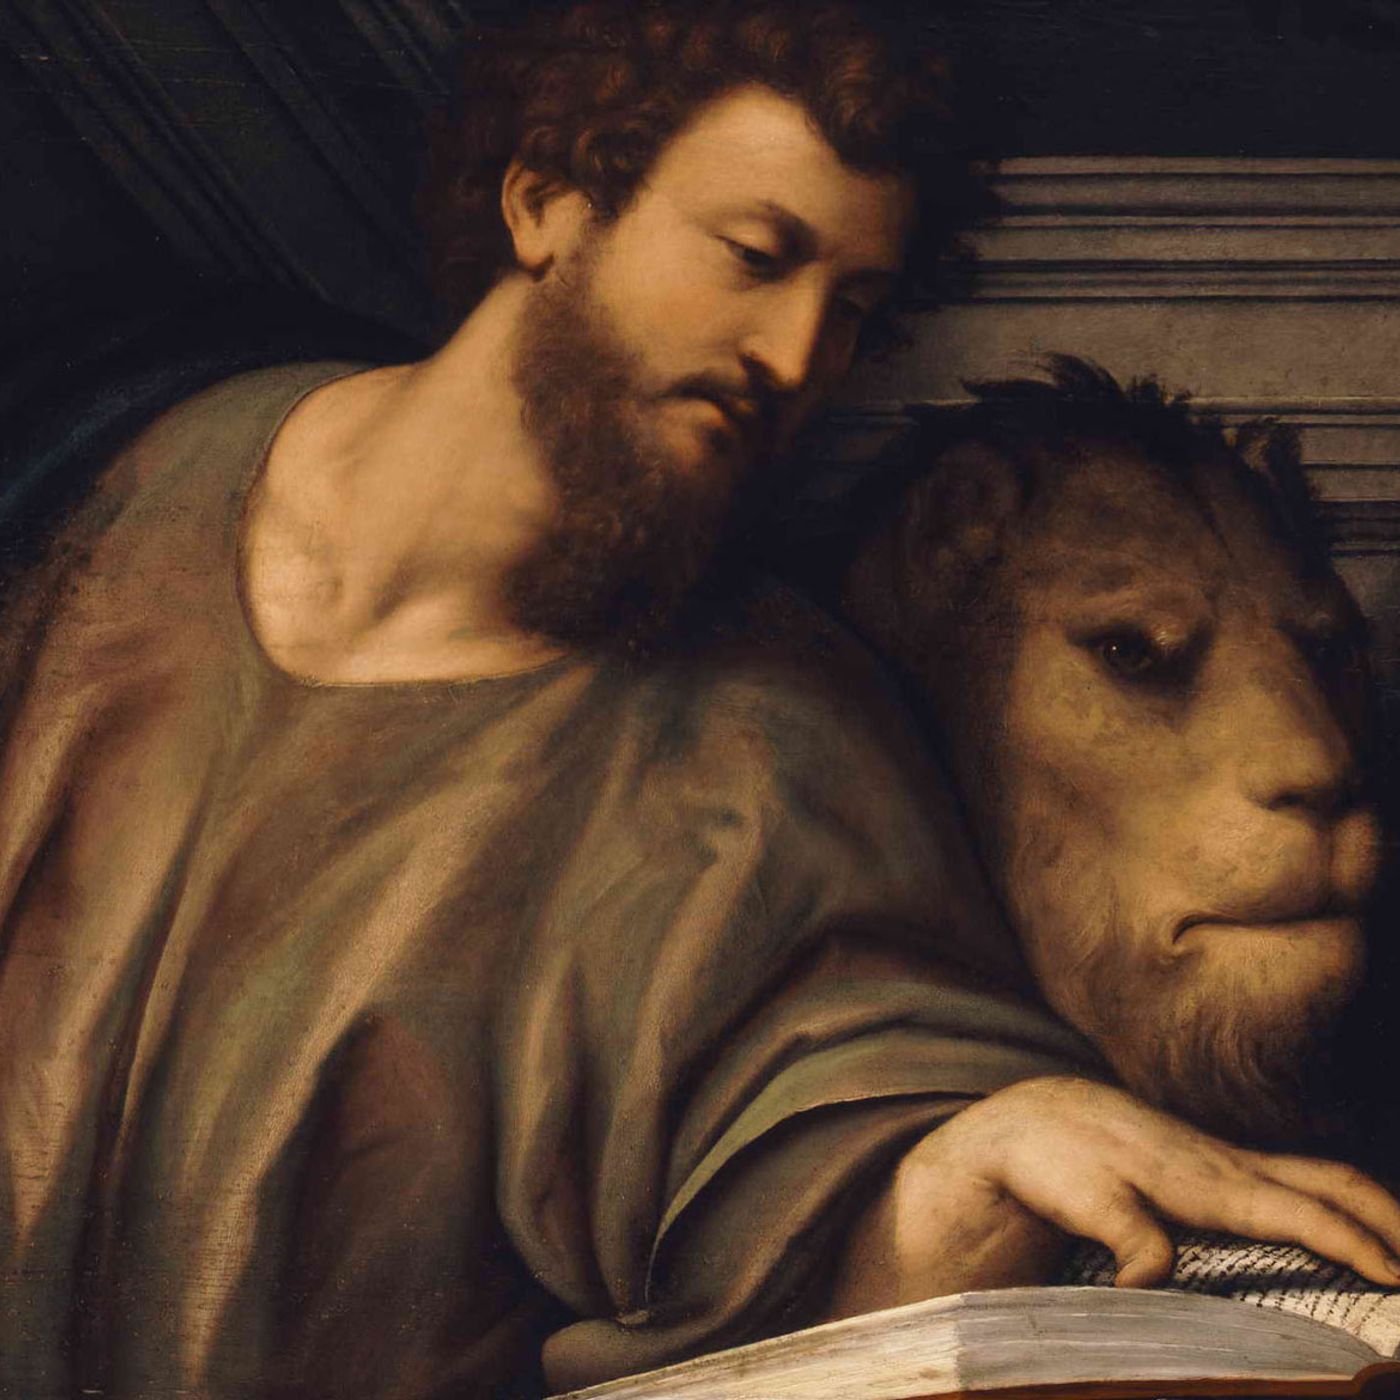 Episode 14: St. Mark the Evangelist and St. Catherine of Siena